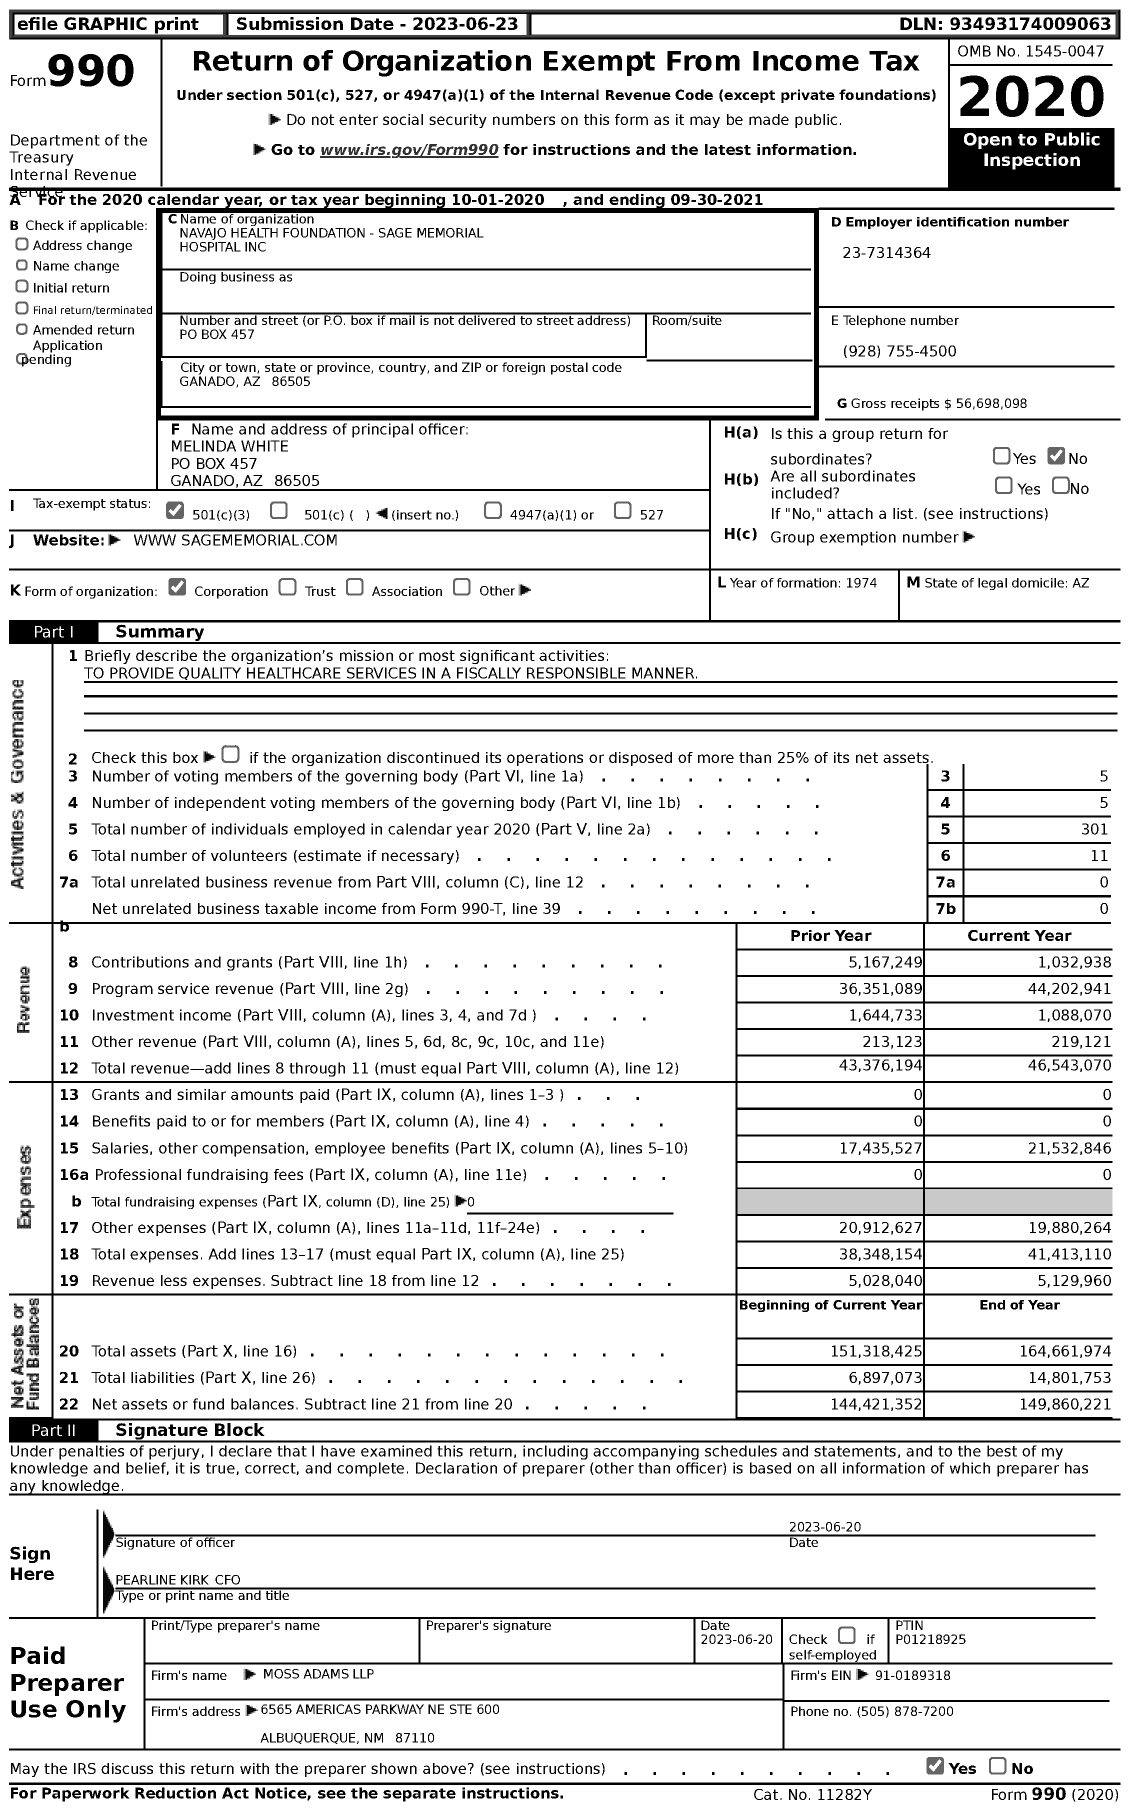 Image of first page of 2020 Form 990 for Navajo Health Foundationsage - Sage Memorial Hospital